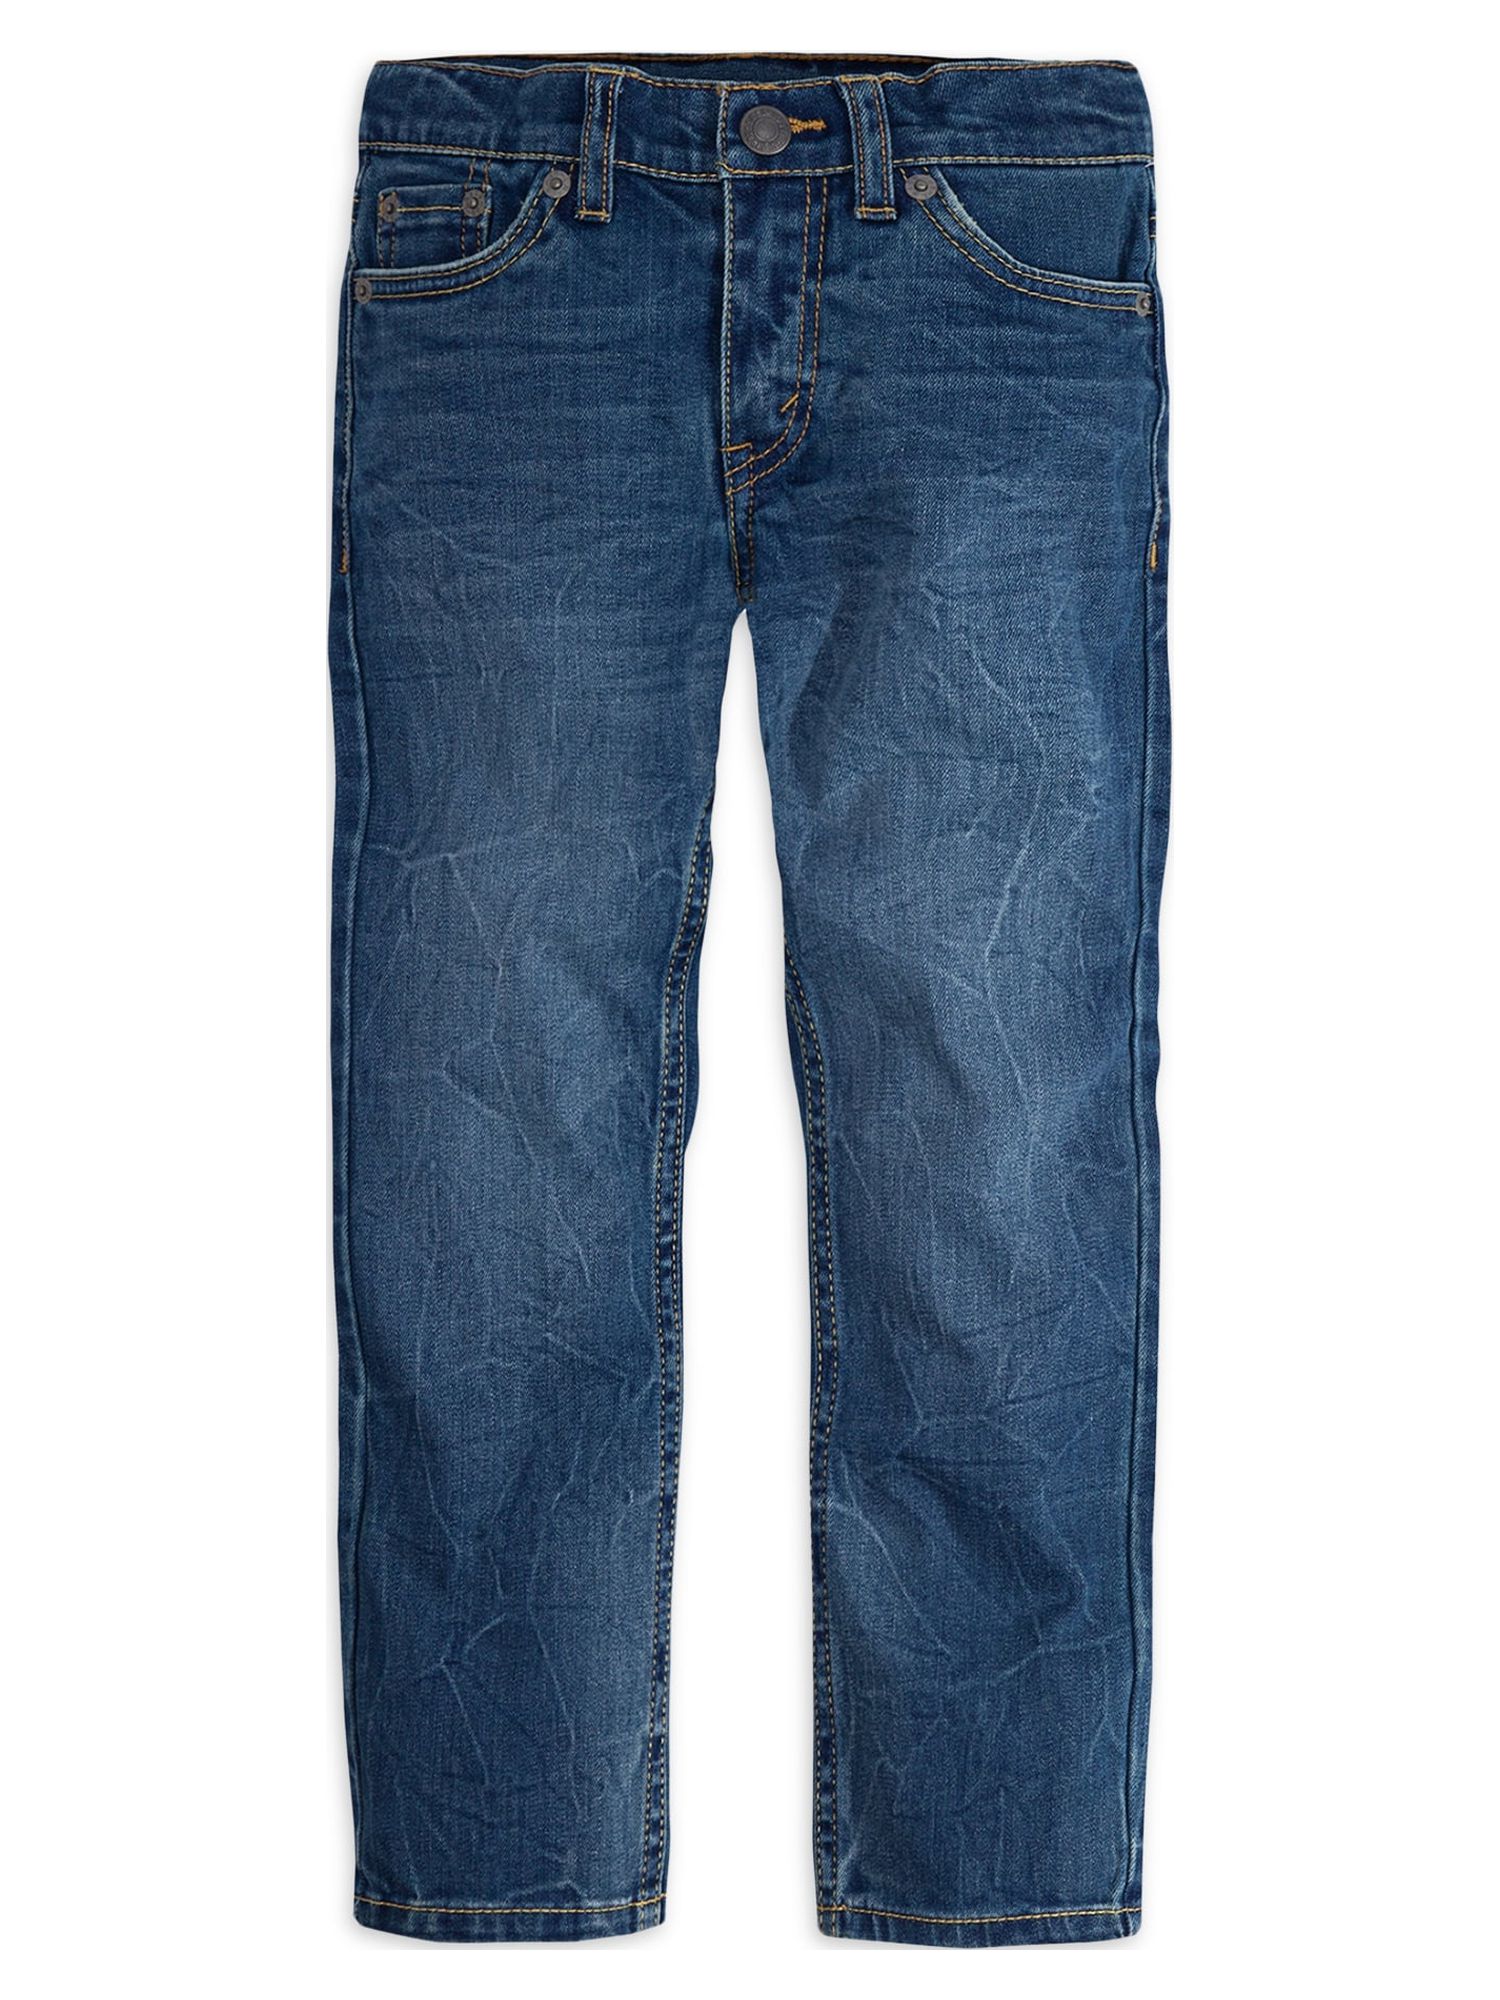 Levi's Boys' Regular Taper Fit Jeans, Sizes 4-20 - image 1 of 13